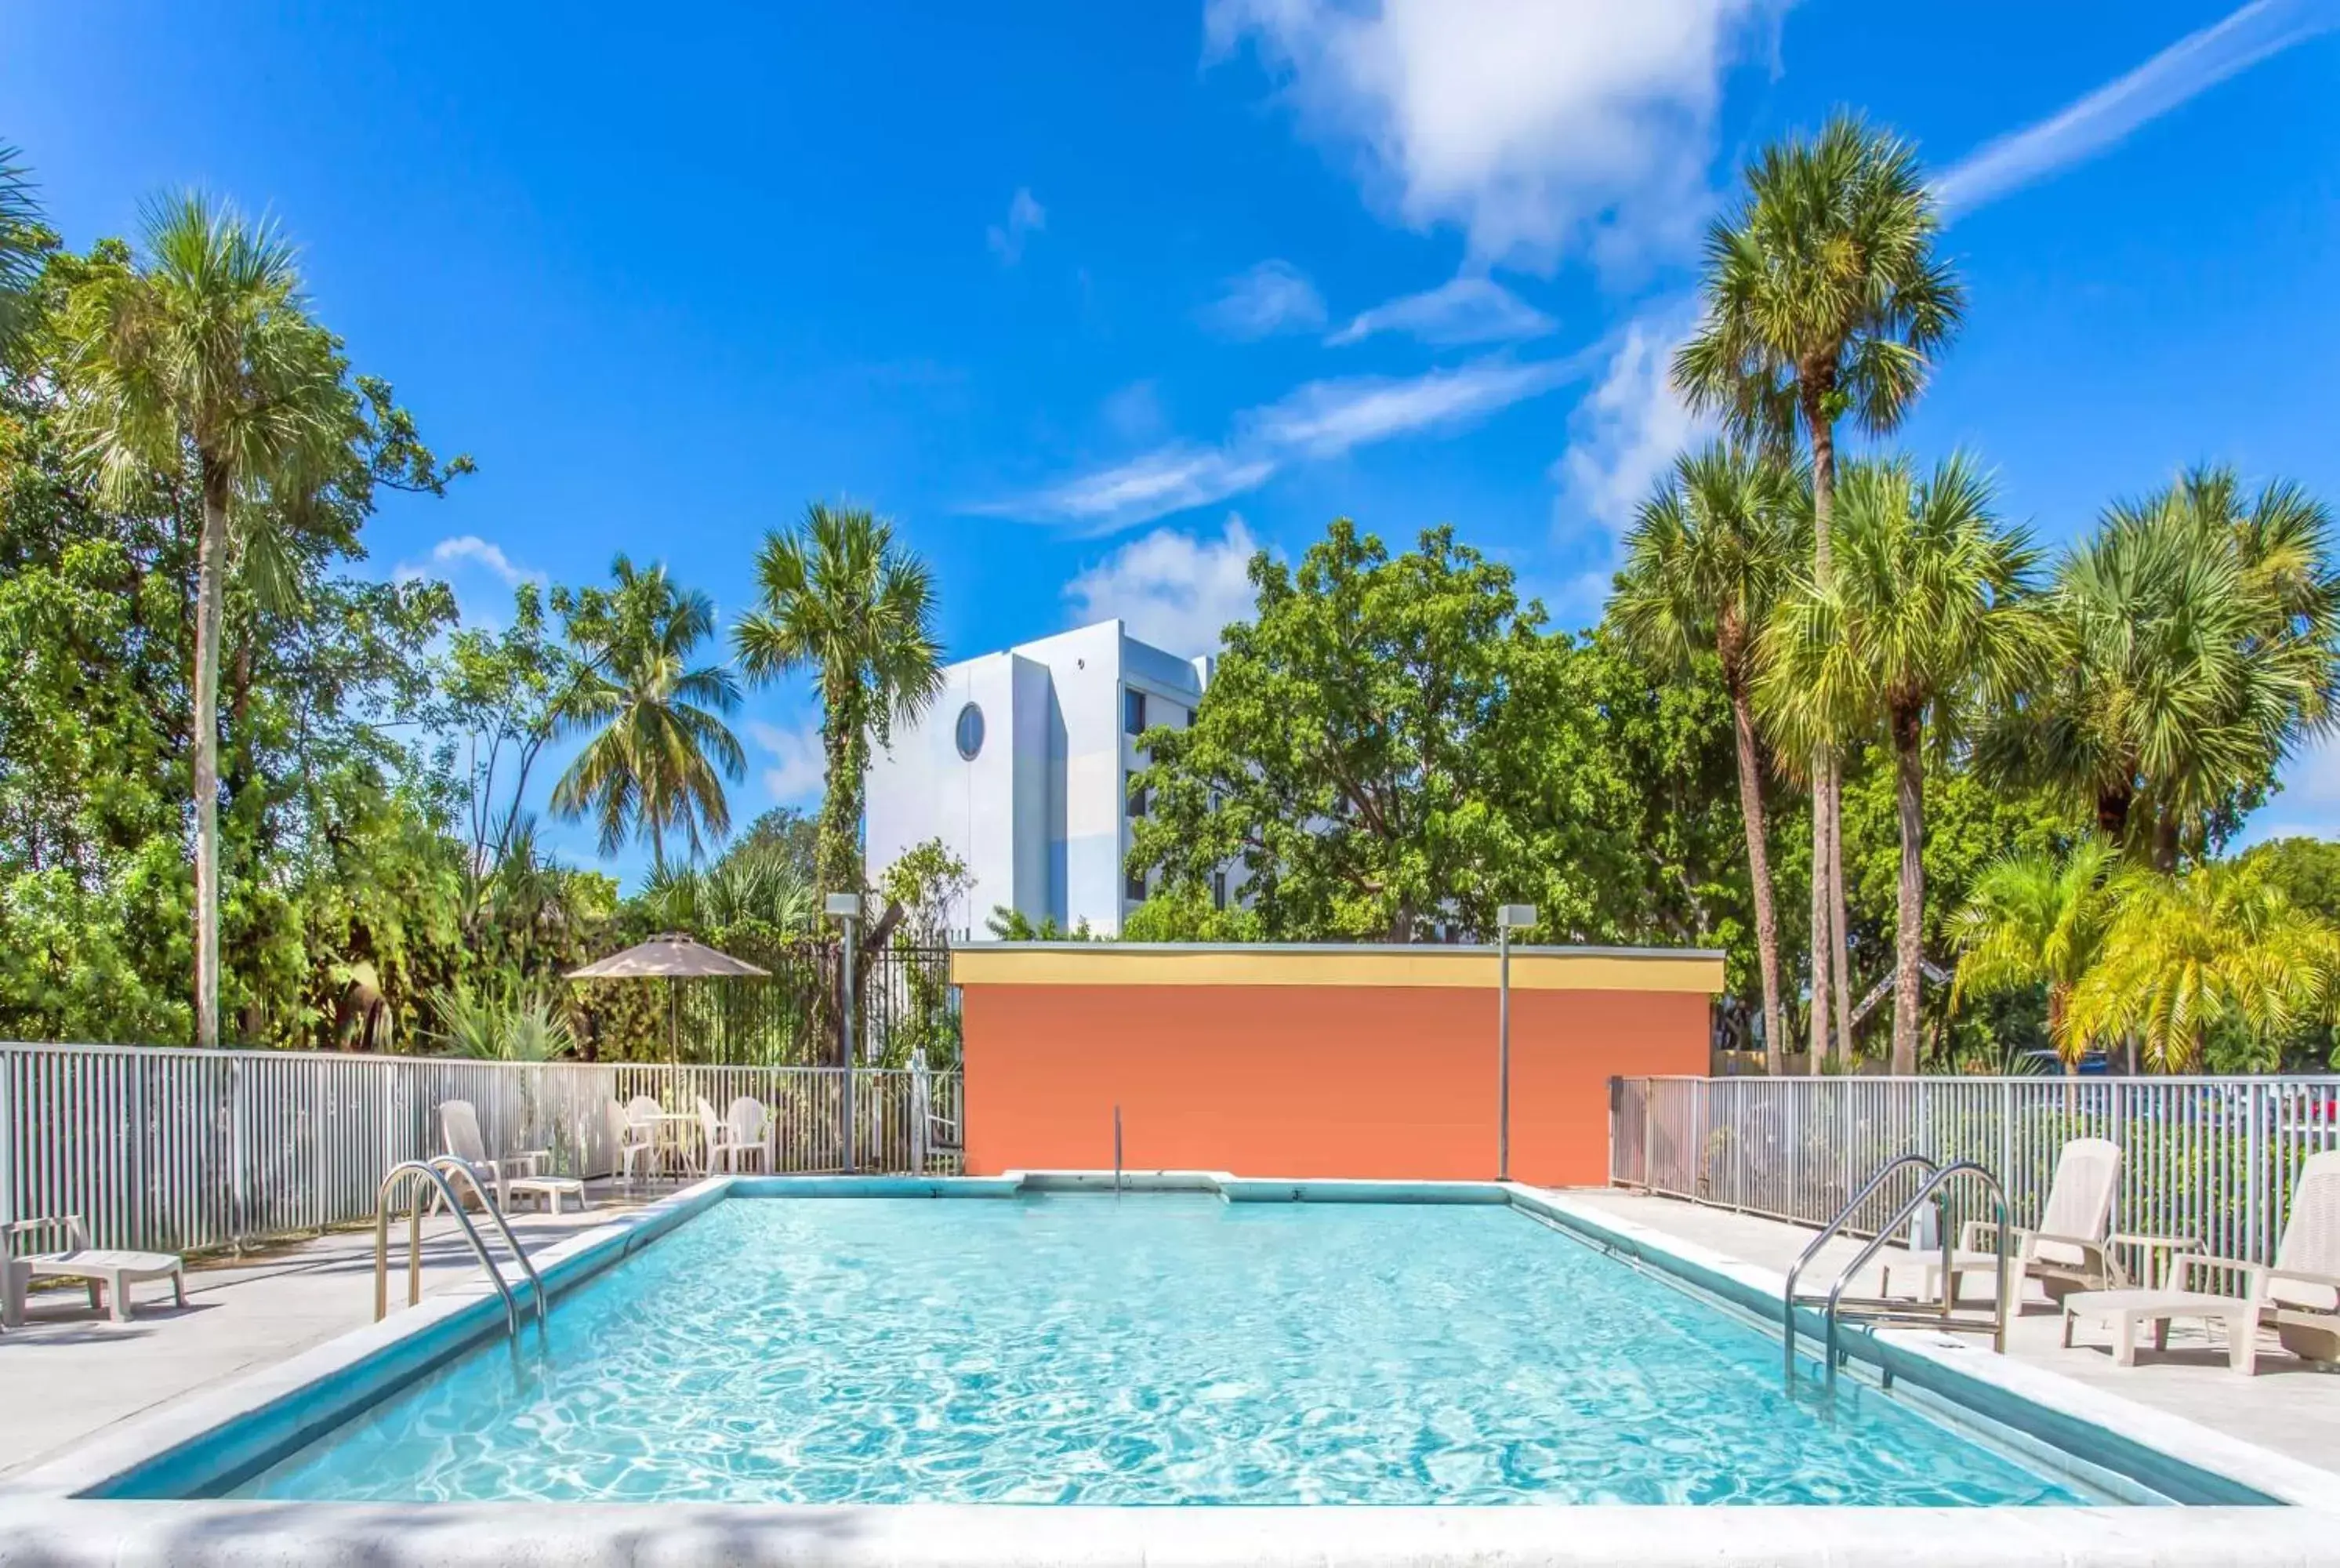 Activities, Swimming Pool in Days Inn by Wyndham Fort Lauderdale Airport Cruise Port